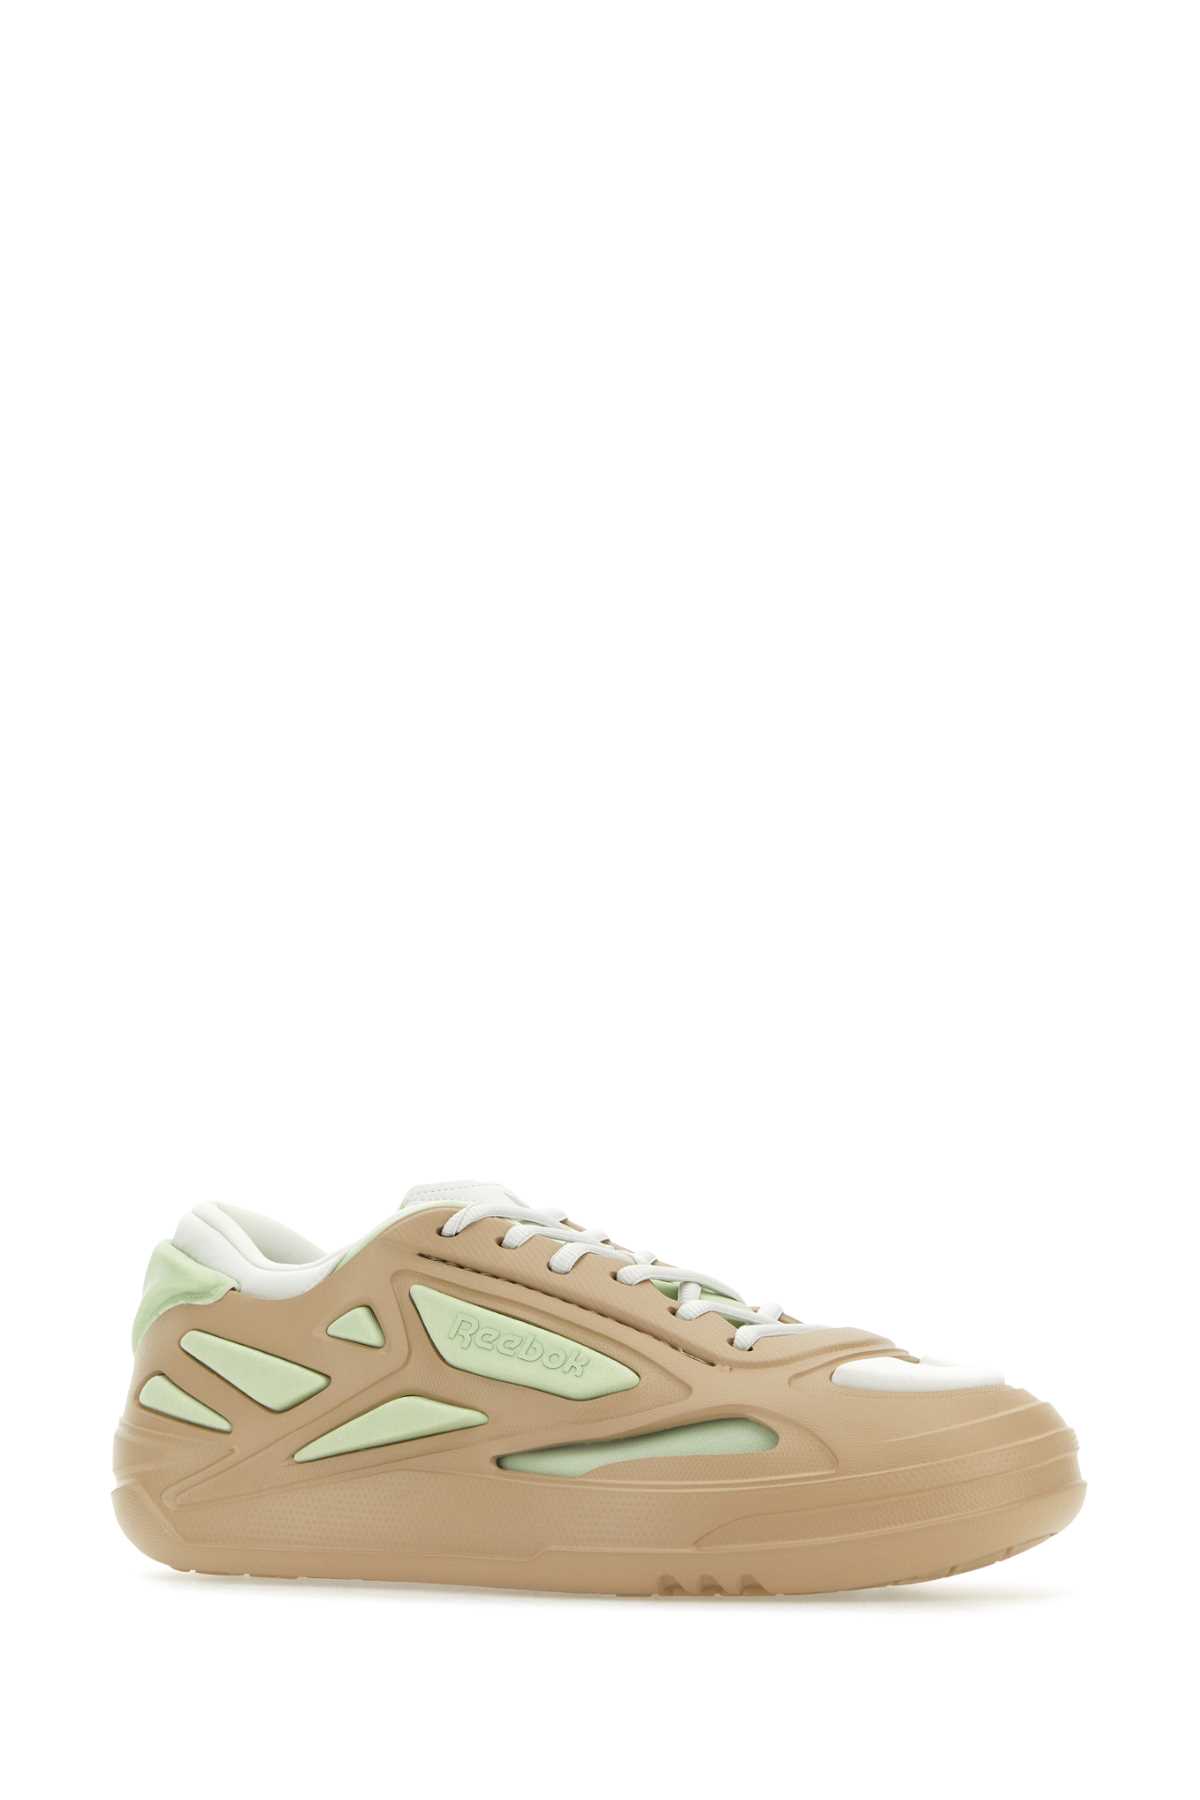 Shop Reebok Multicolor Fabric And Rubber Future Club C Sneakers In Beigelig